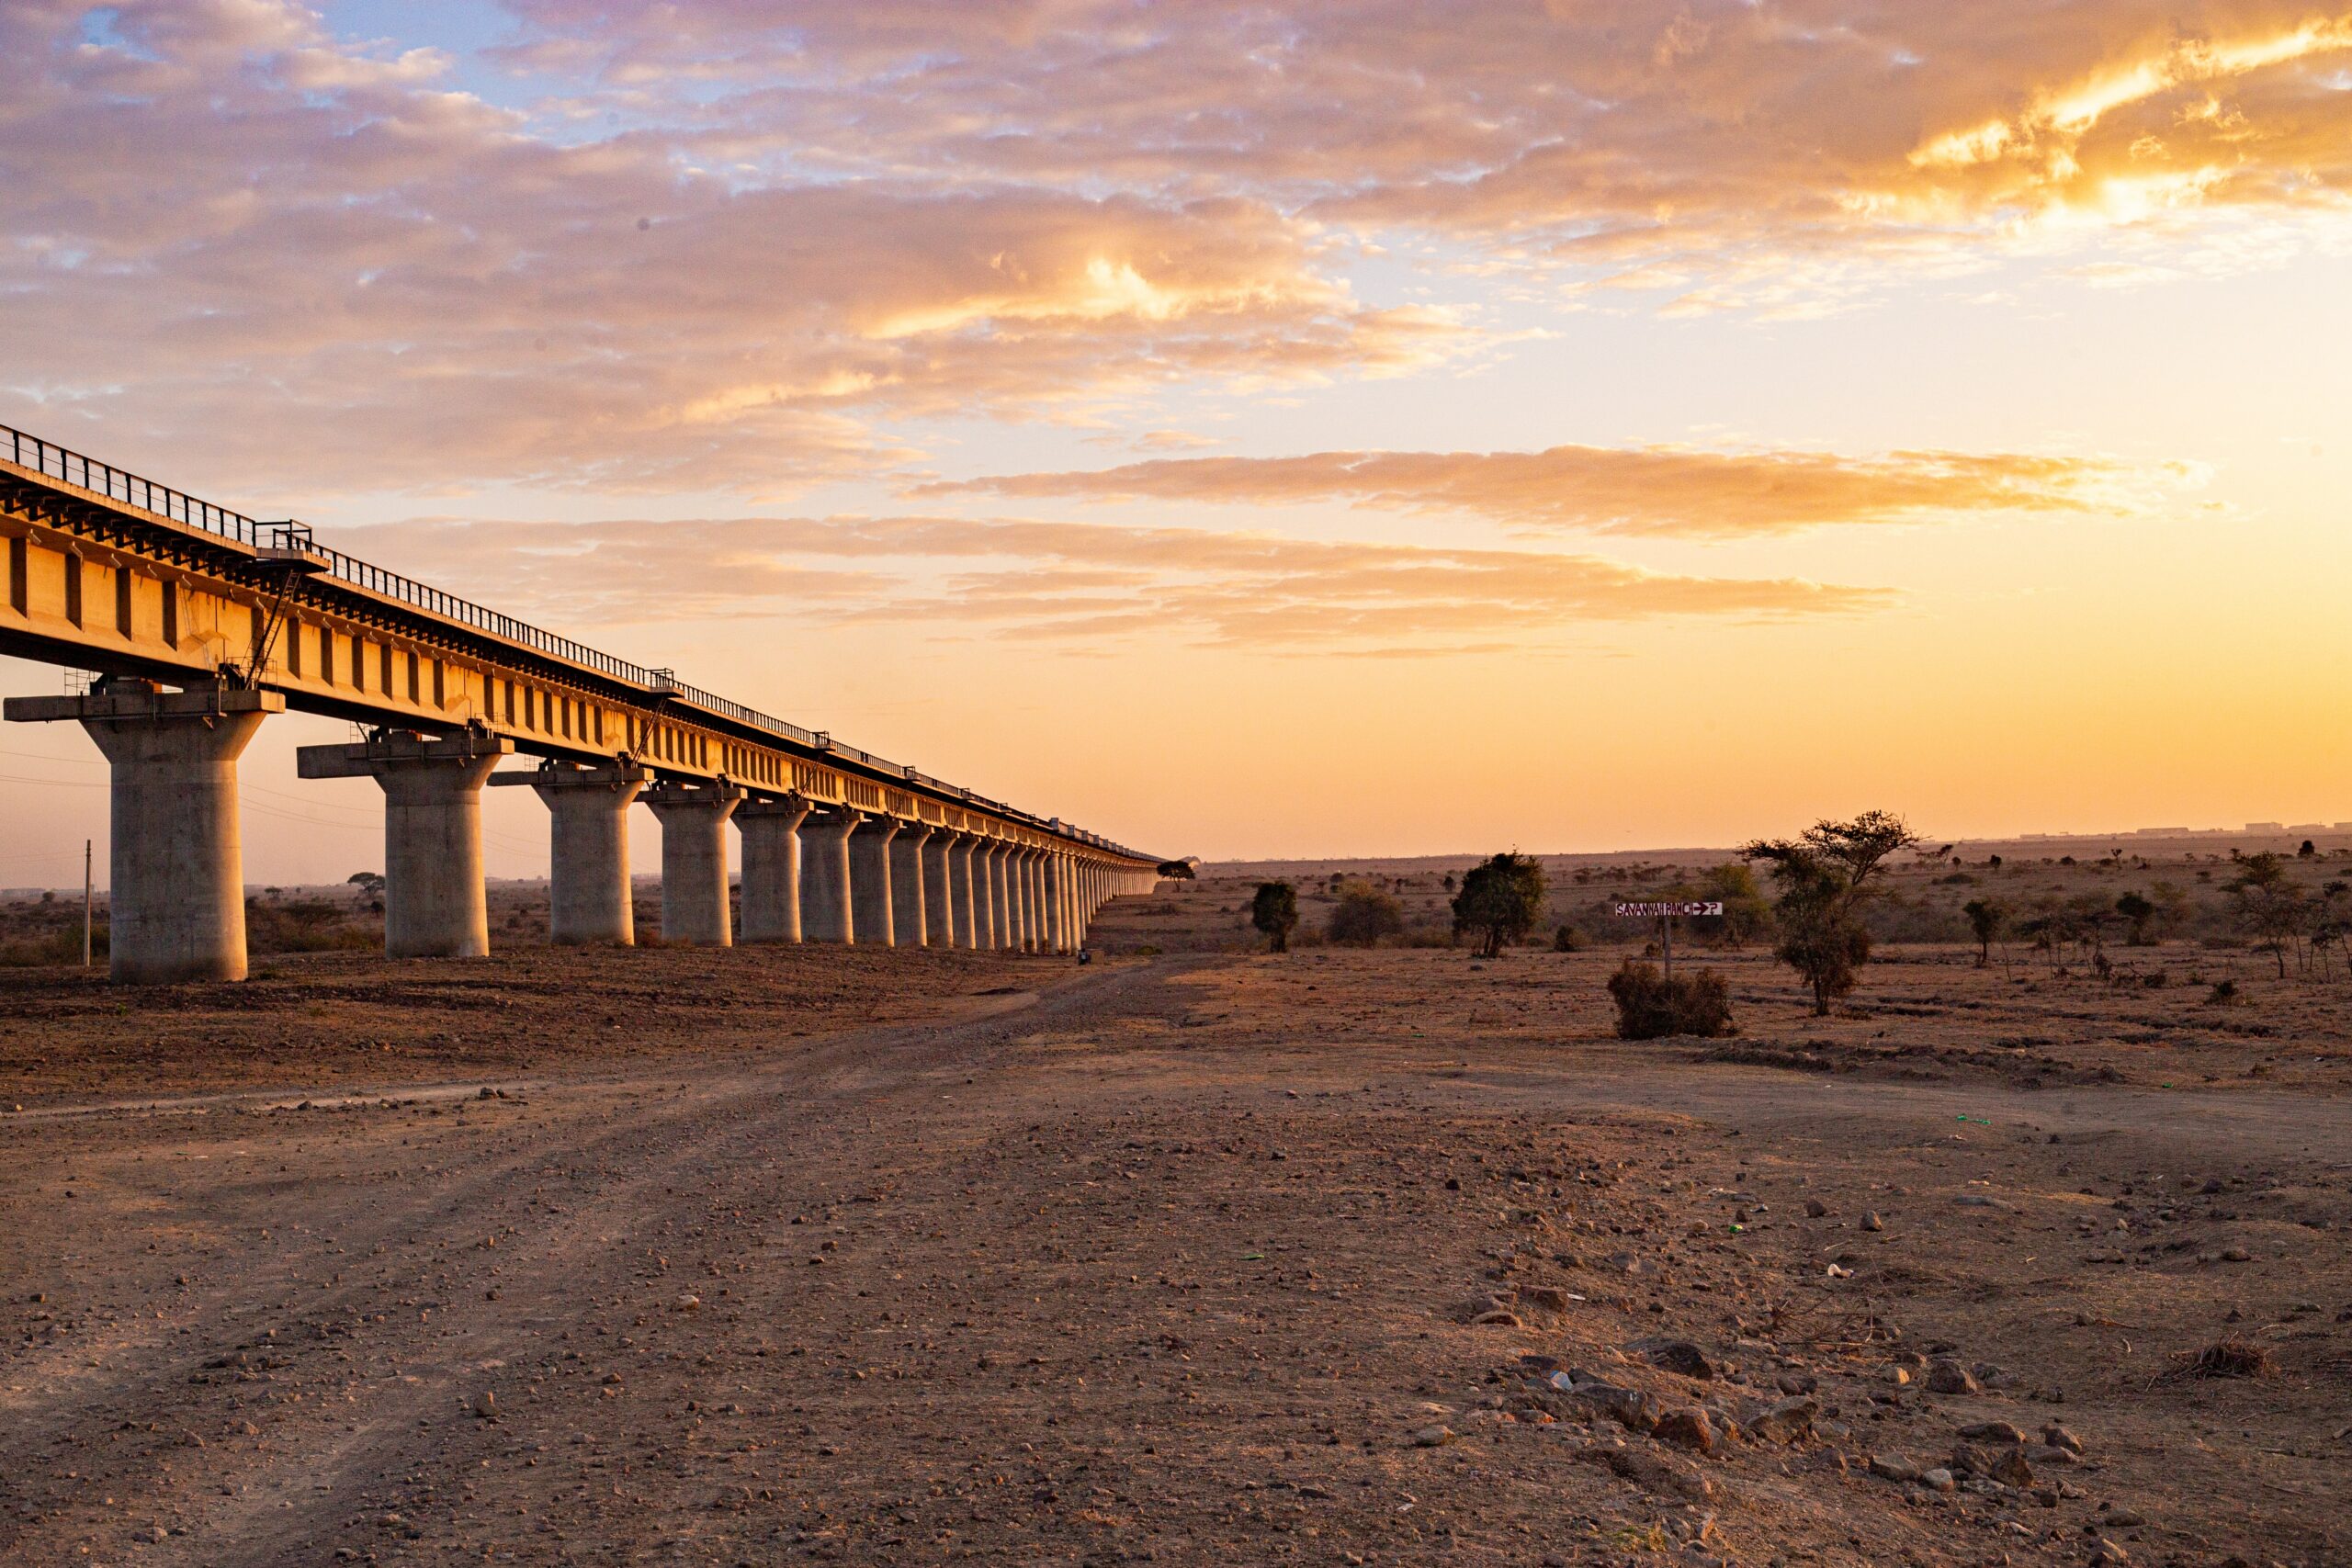 A photo of the Standard Gauge Railway (SGR),one of the massive construction projects under the China Belt and Road Initiative. Image source; Unsplash